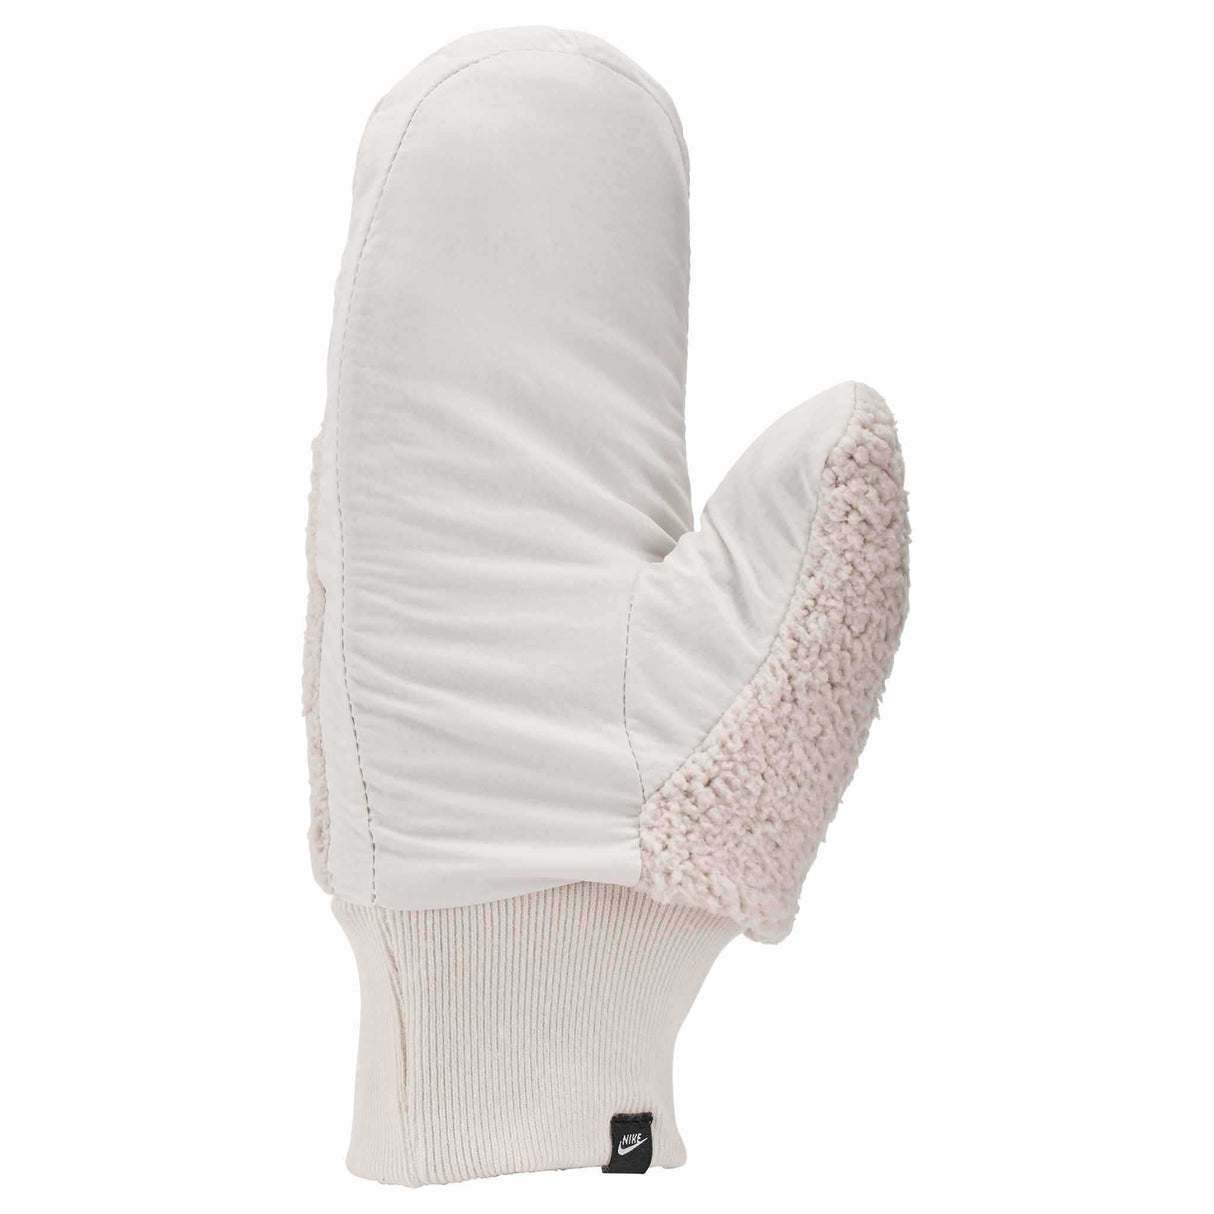 Nike Sherpa Mitten mitaines pour femme - Orewood Brn - paume